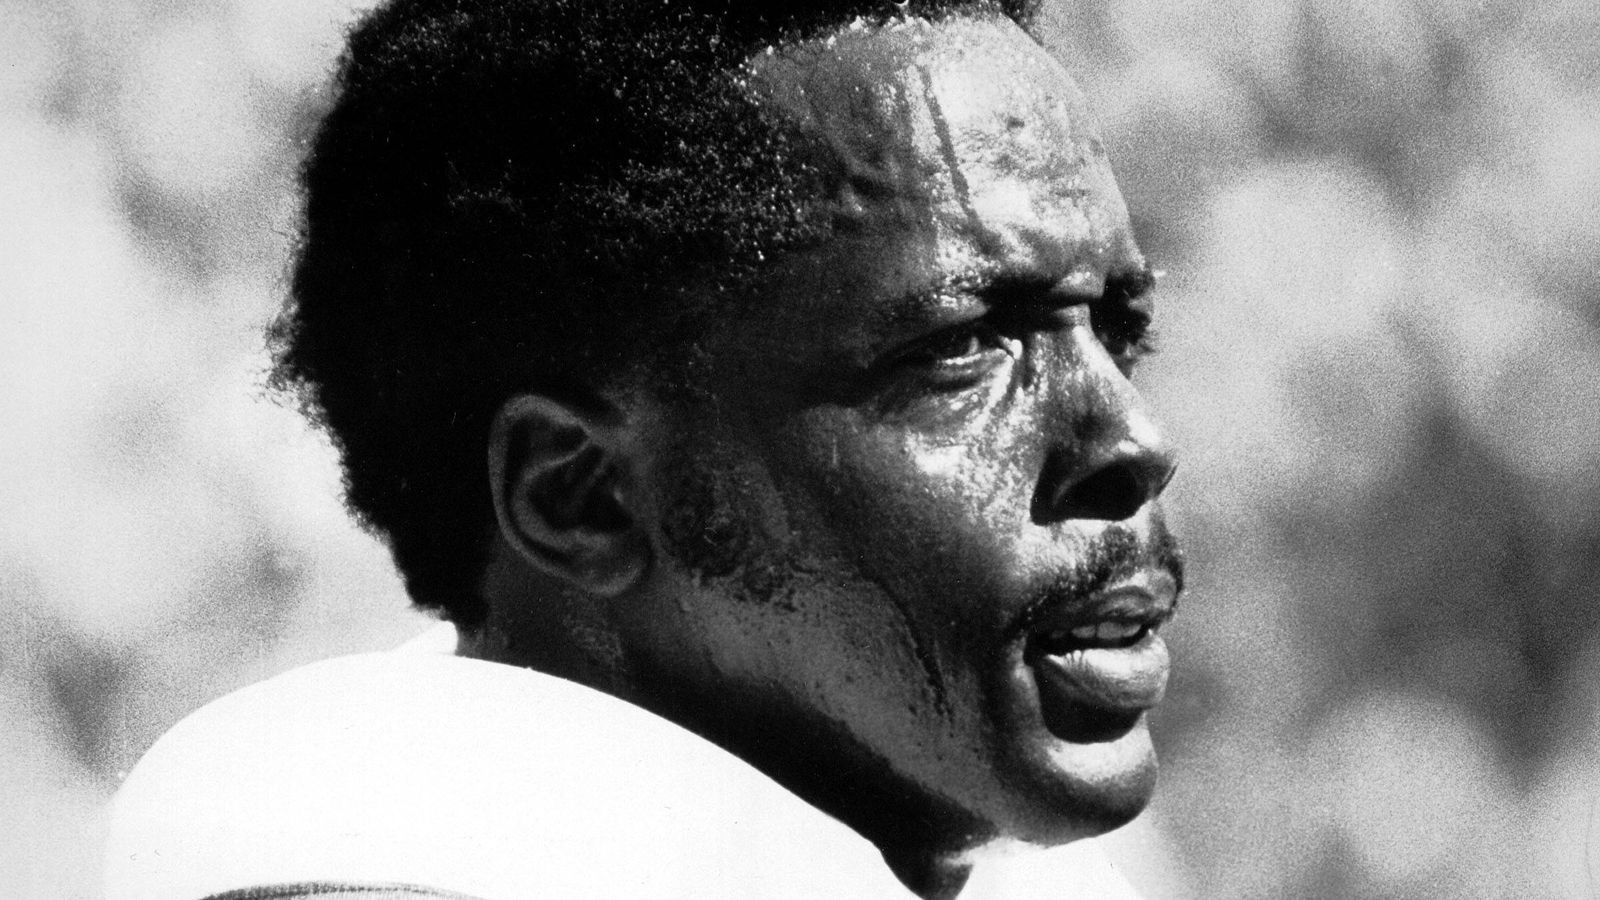 
                <strong>Deacon Jones</strong><br>
                Aktiv: 1961 - 1974Position: Defensive EndTeams: Los Angeles Rams, San Diego Chargers, Washington RedskinsErfolge: 8x Pro Bowl, 2x Defensive Player of the Year
              